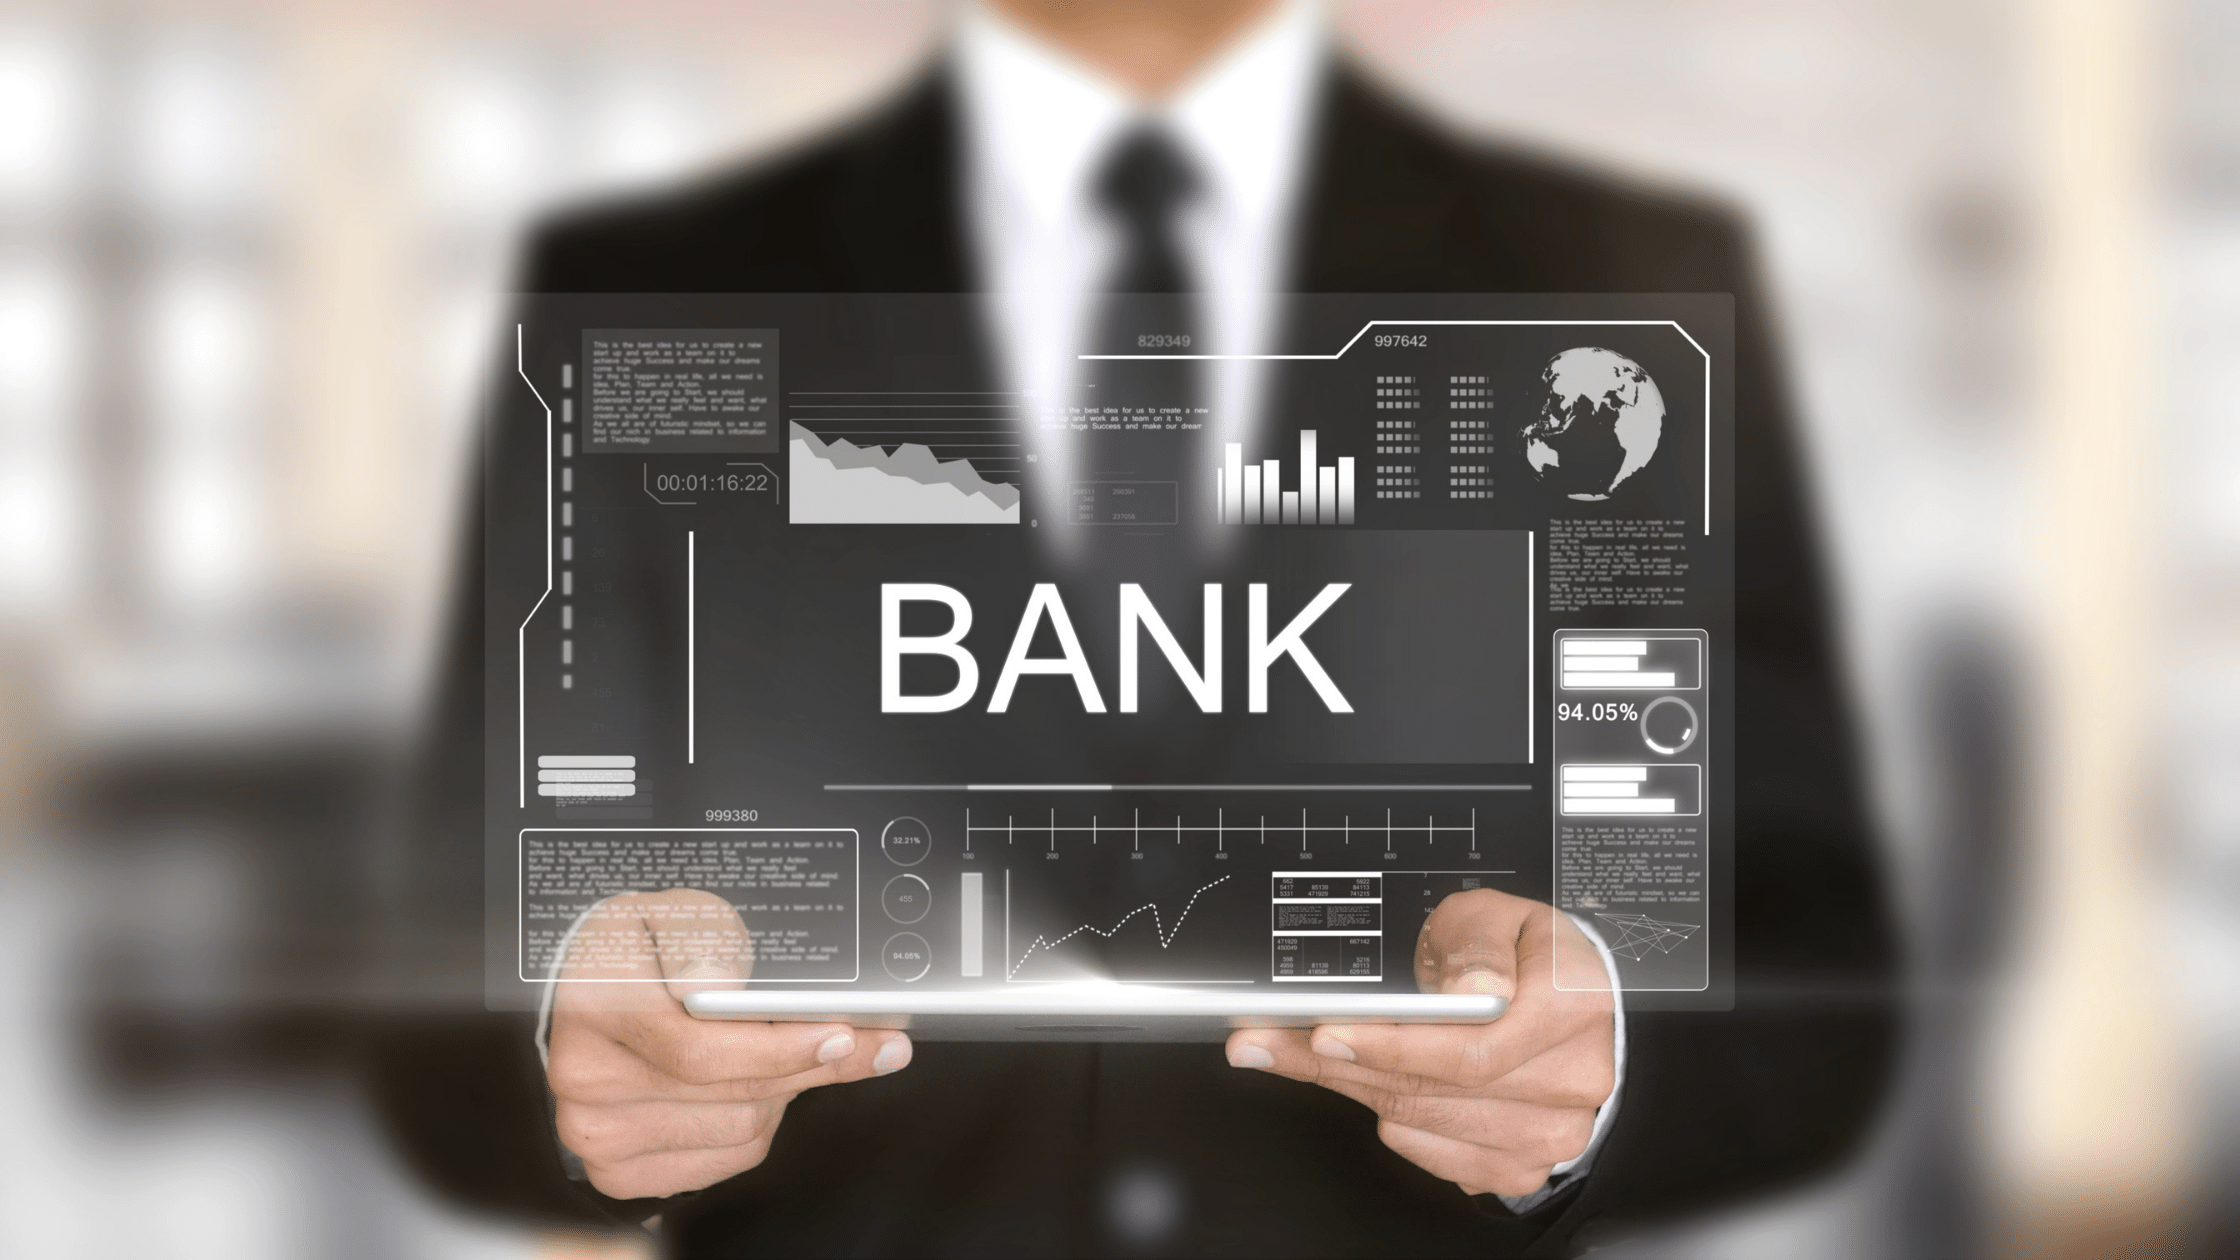 BANKING FOR SMALL BUSINESSES